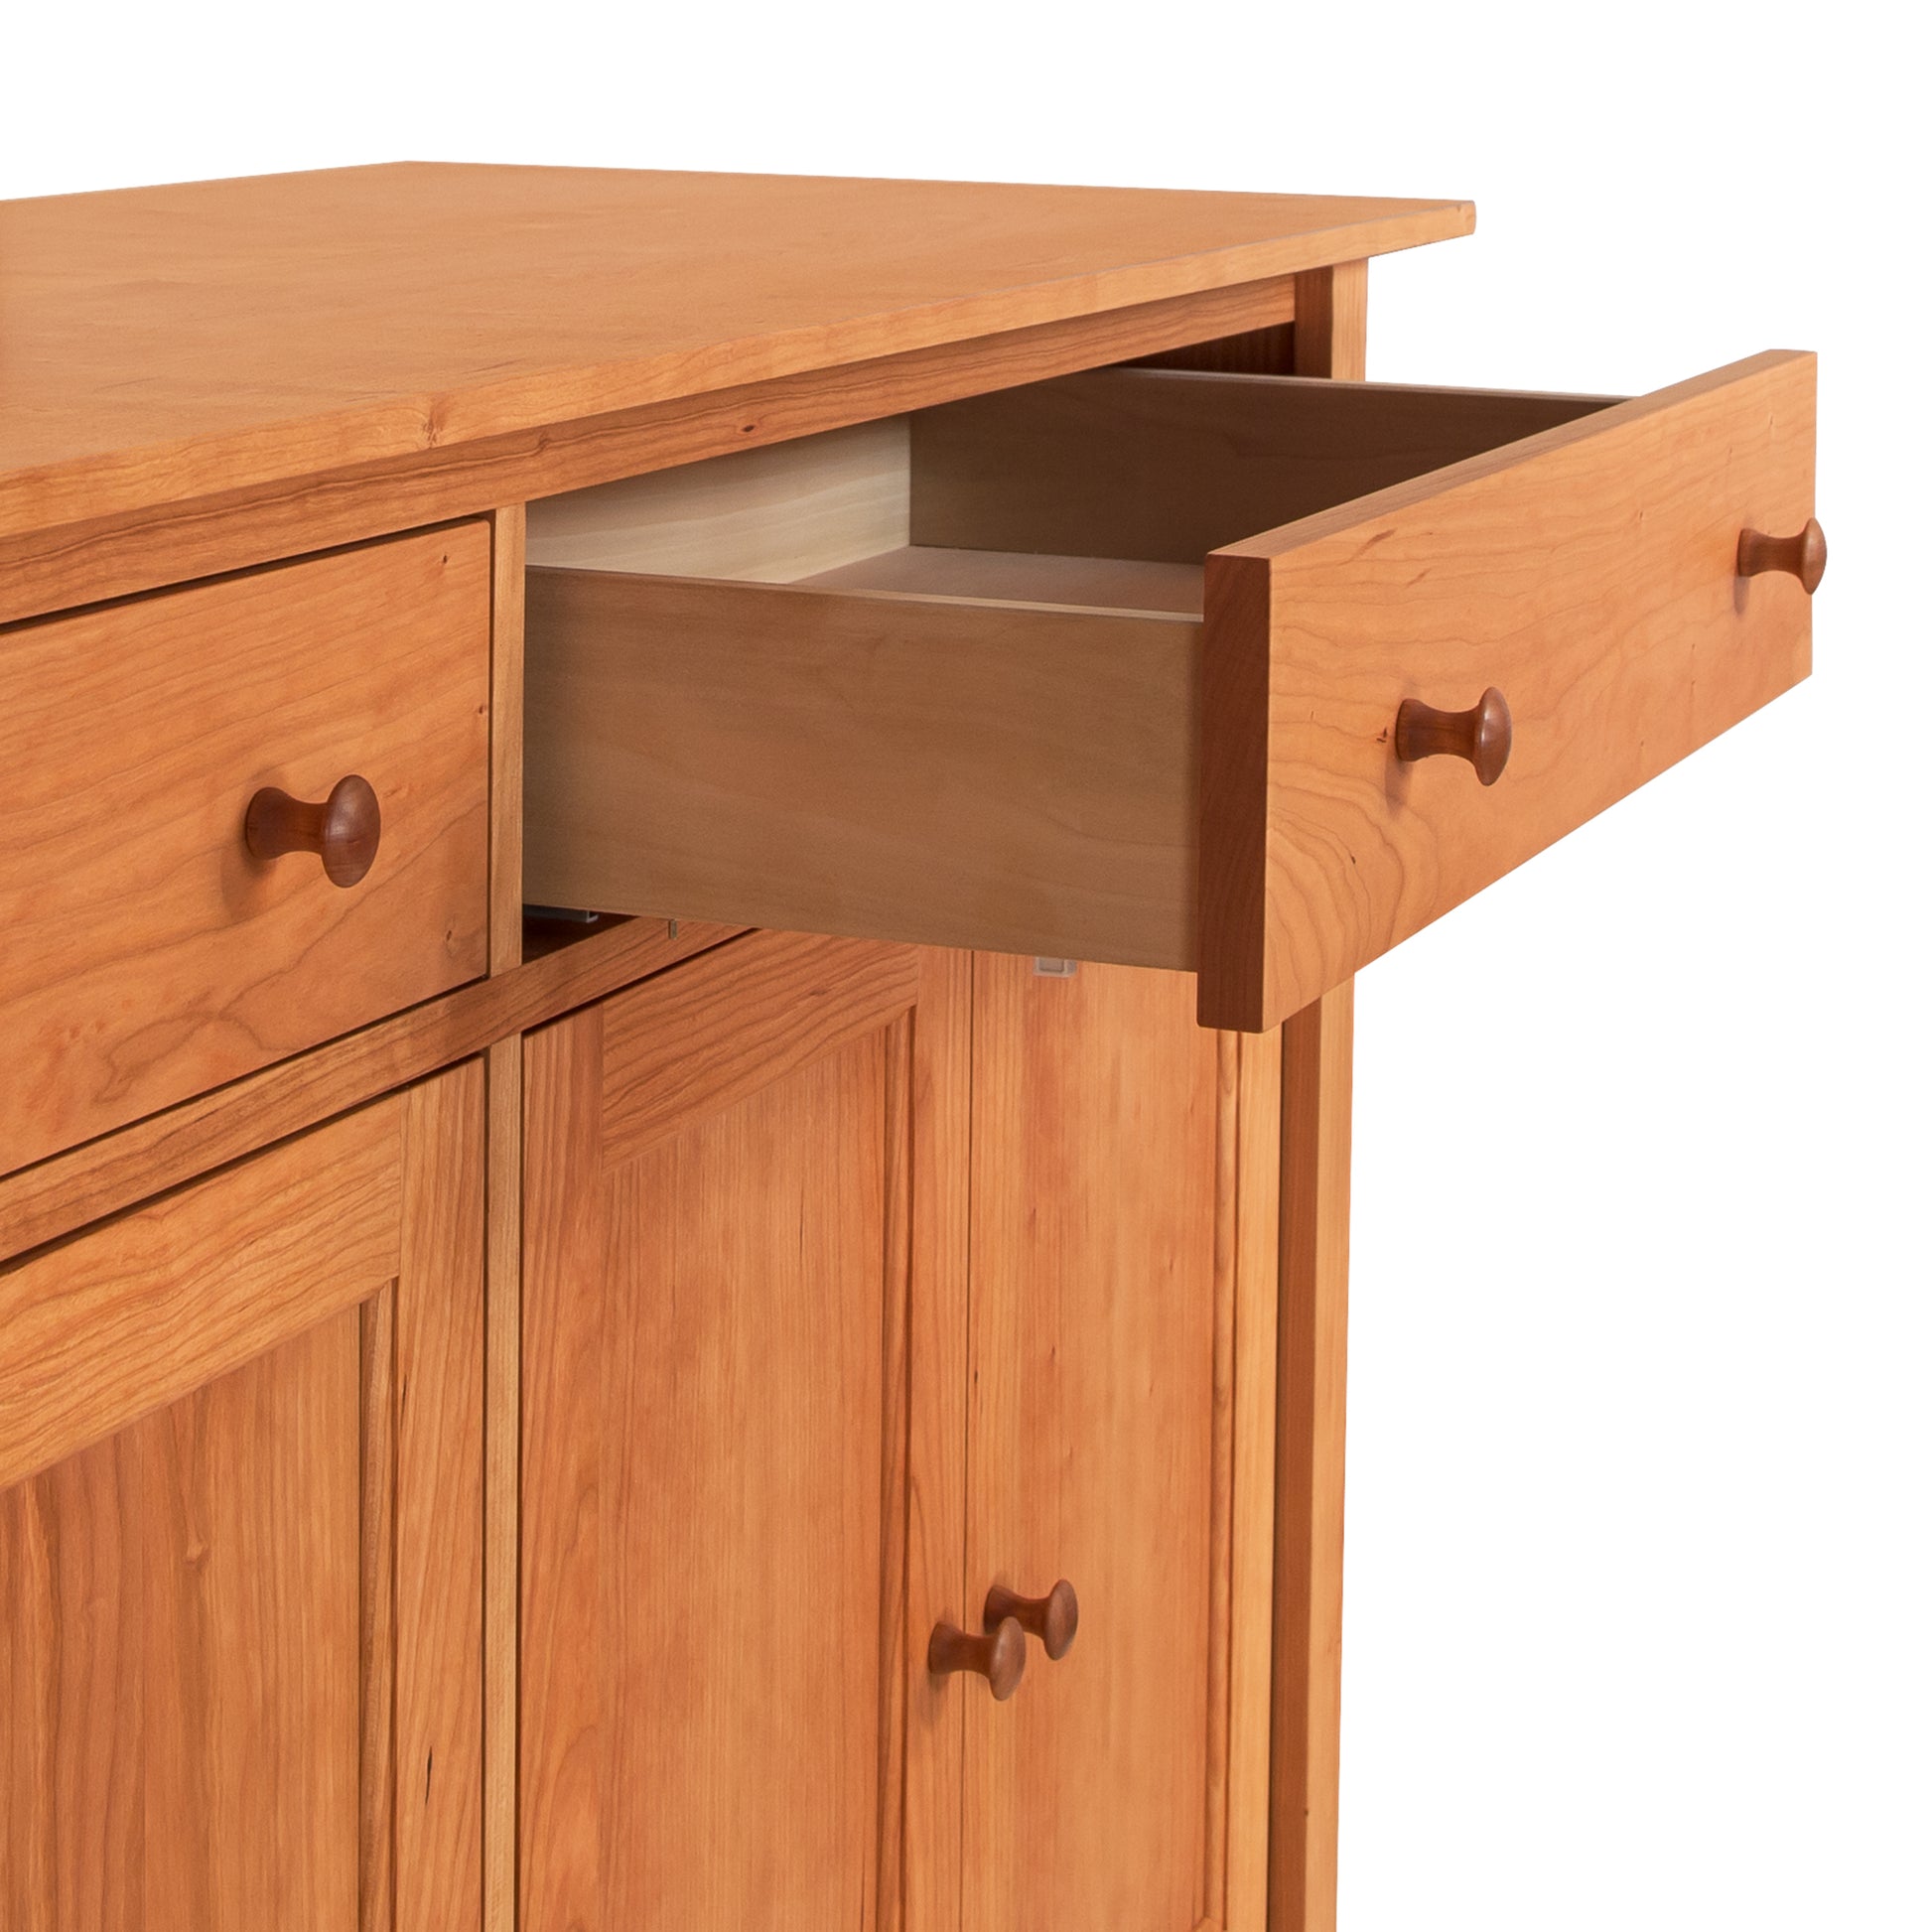 American Shaker Sideboard with an open drawer showing the interior and handle details, showcasing Maple Corner Woodworks craftsmanship.